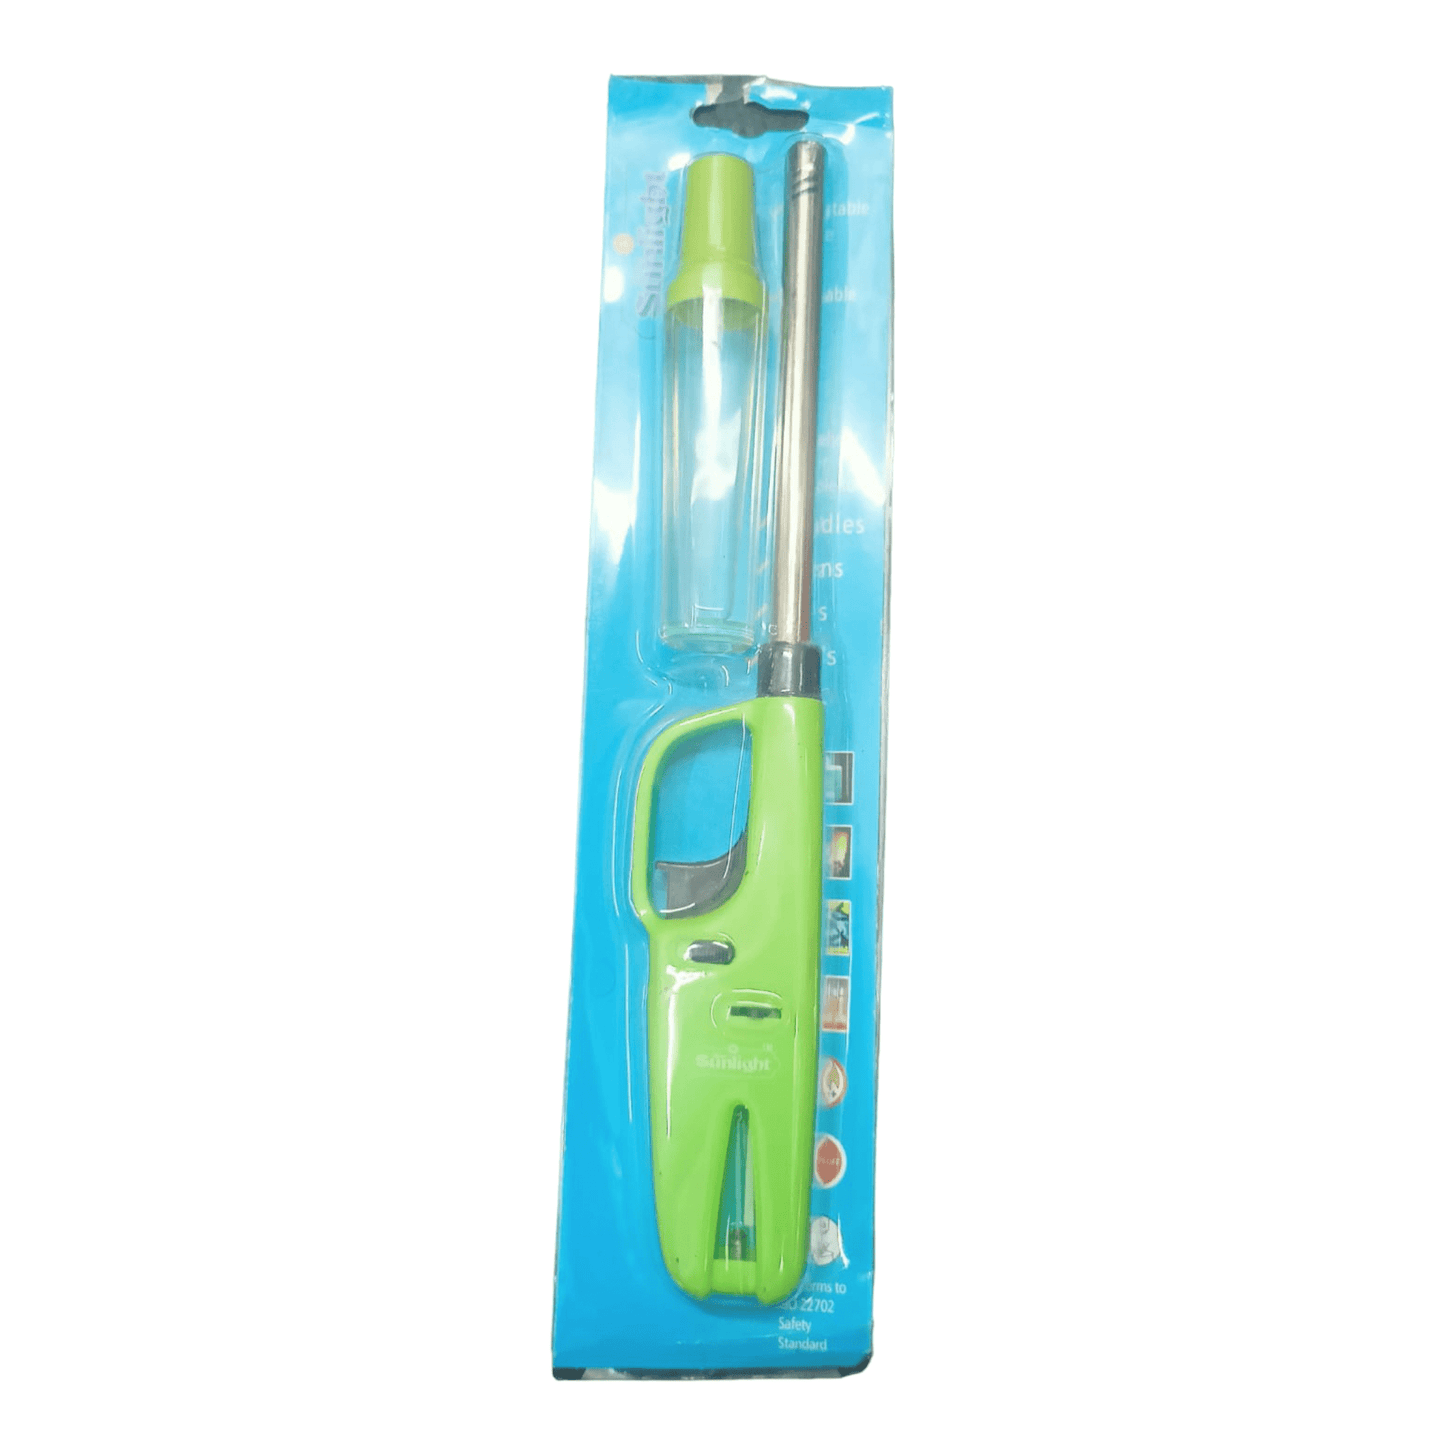 Gas Stove Lighter with 100ml Refill Bottle